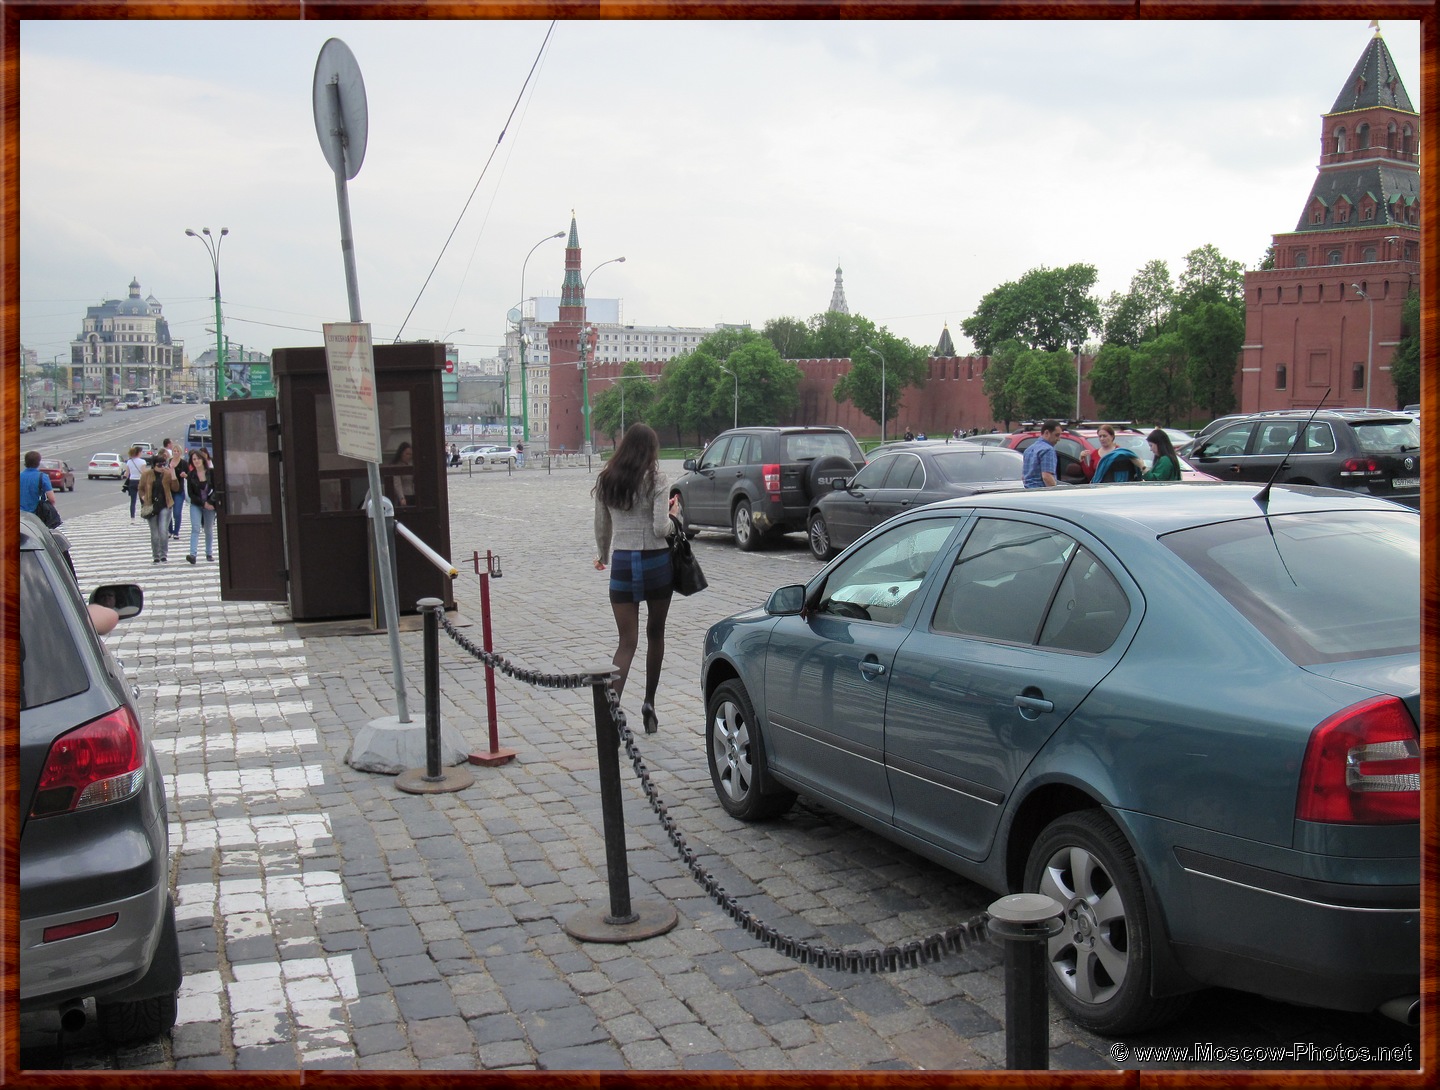 View of the Kremlin Wall